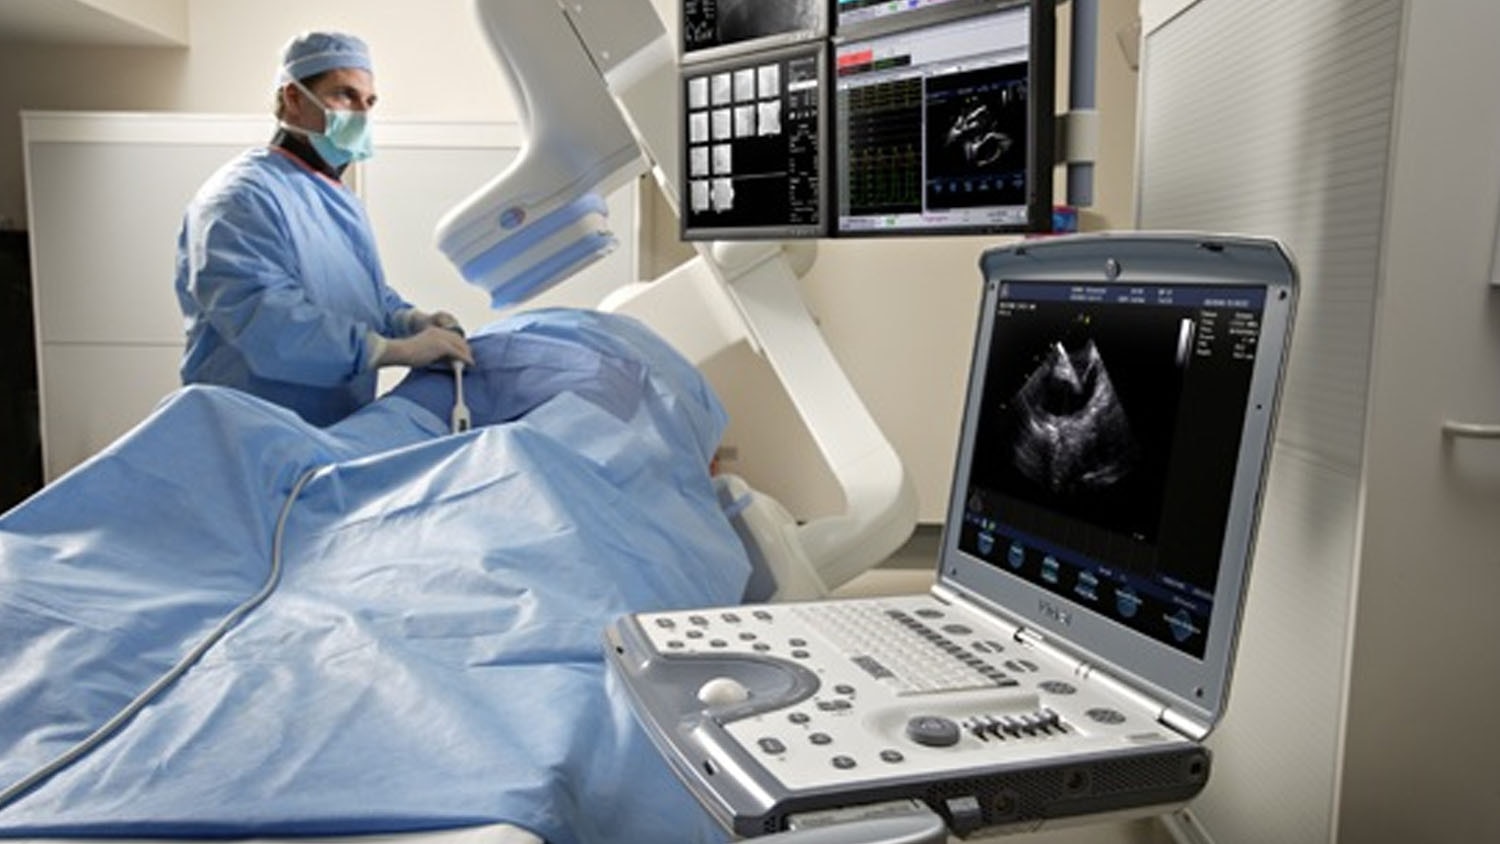 education-product-education-clinical-interventional-systems-igs_vivid-ice_jpg